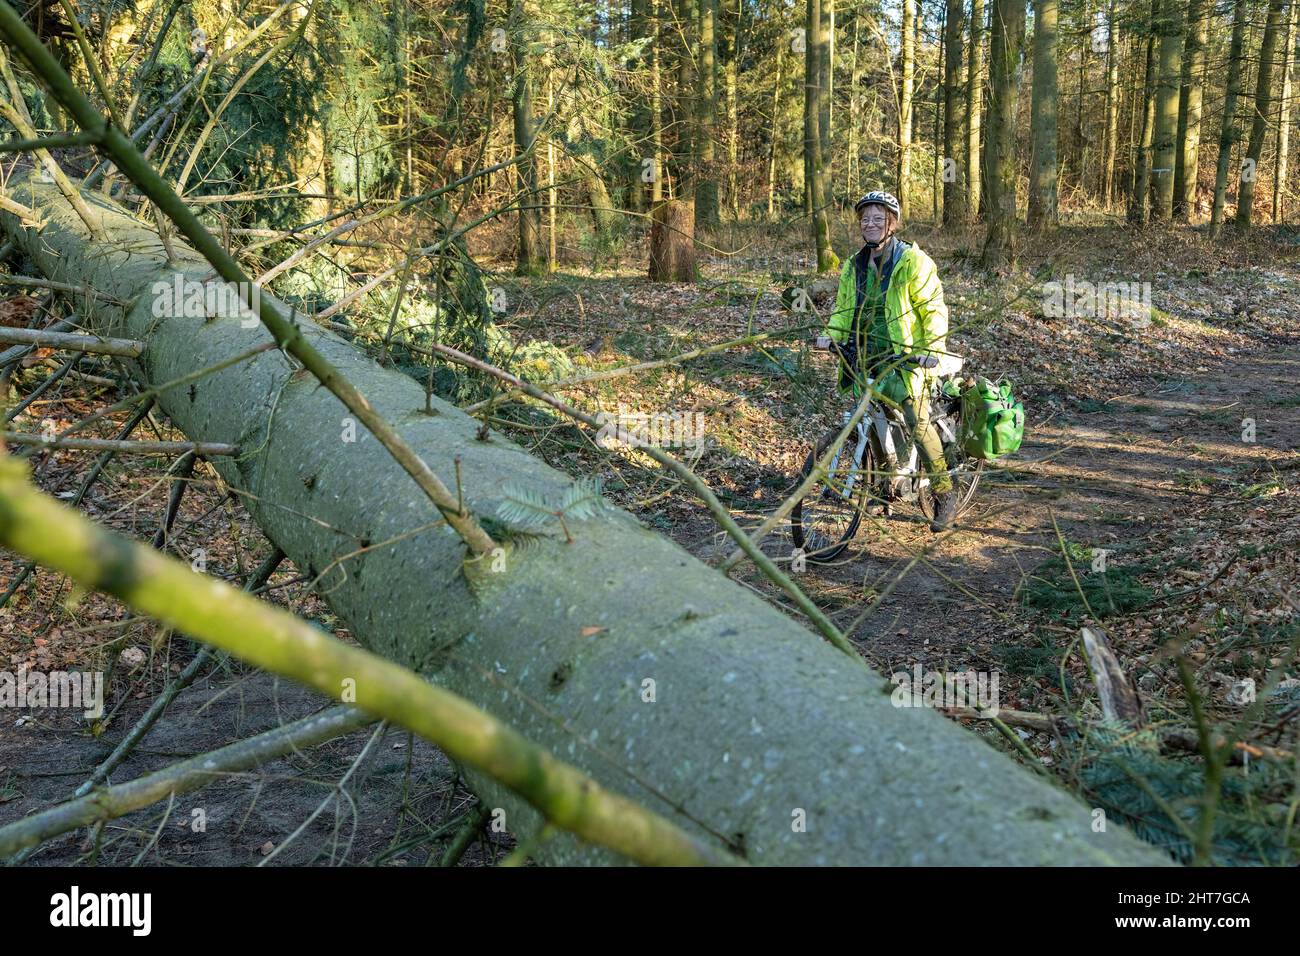 Woman over fifty doing cycling tour with her e-bike through forest after storm, tree blocking path, Lueneburg, Lower Saxony, Germany Stock Photo